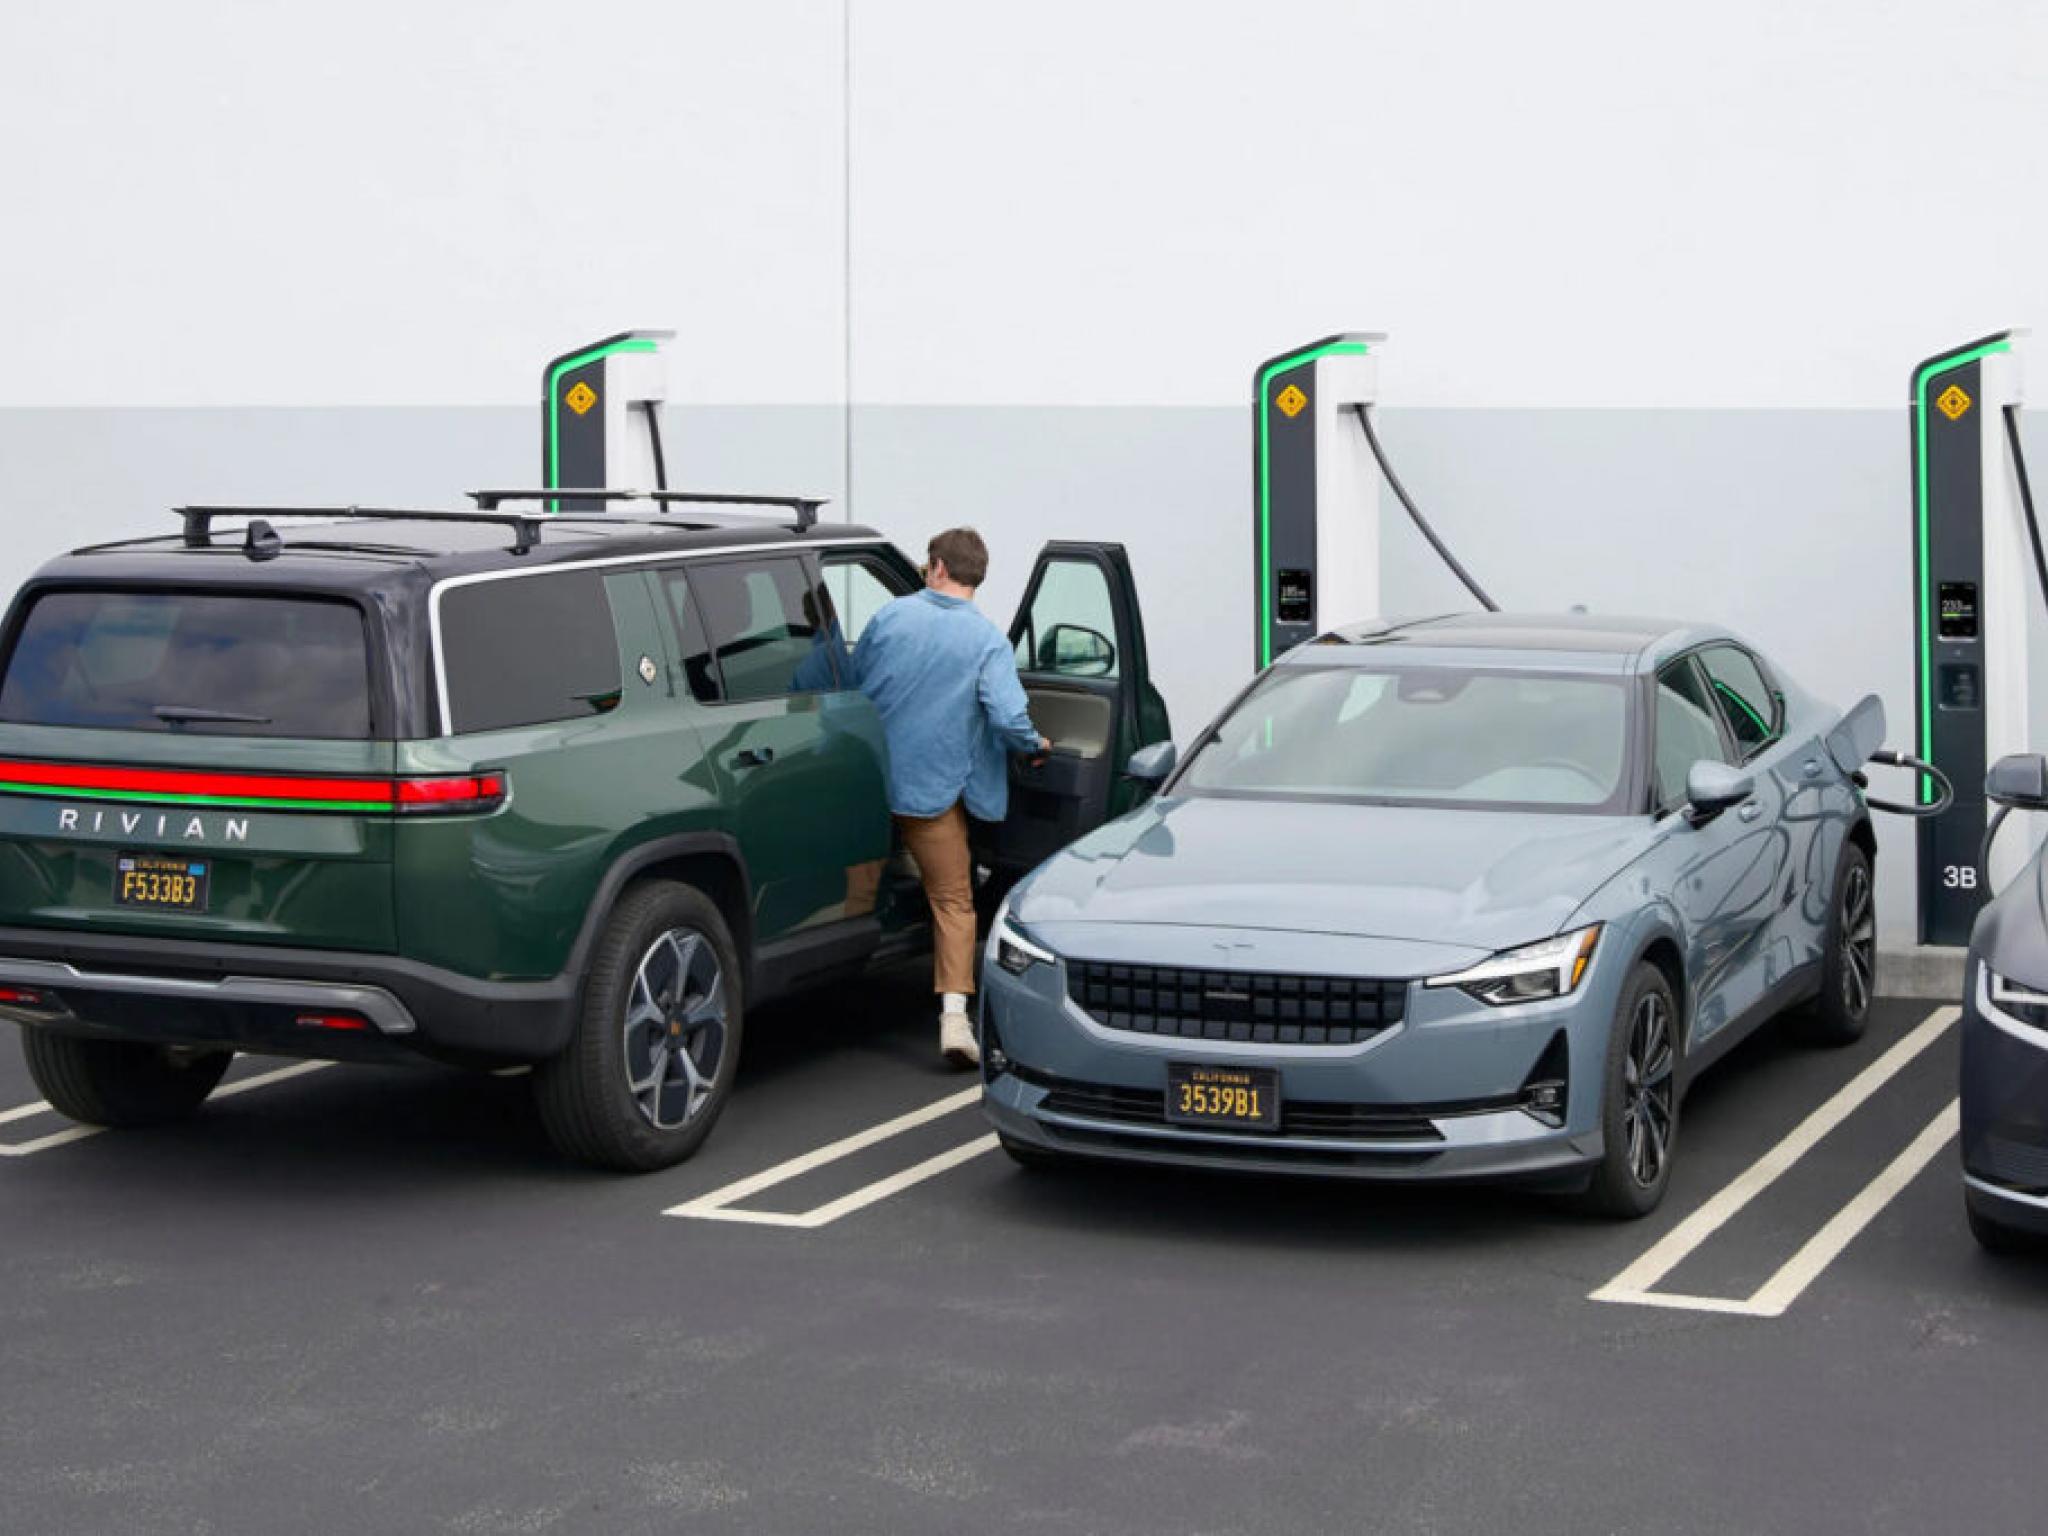  rivian-unveils-new-charger-design-opens-adventure-network-to-other-evs 